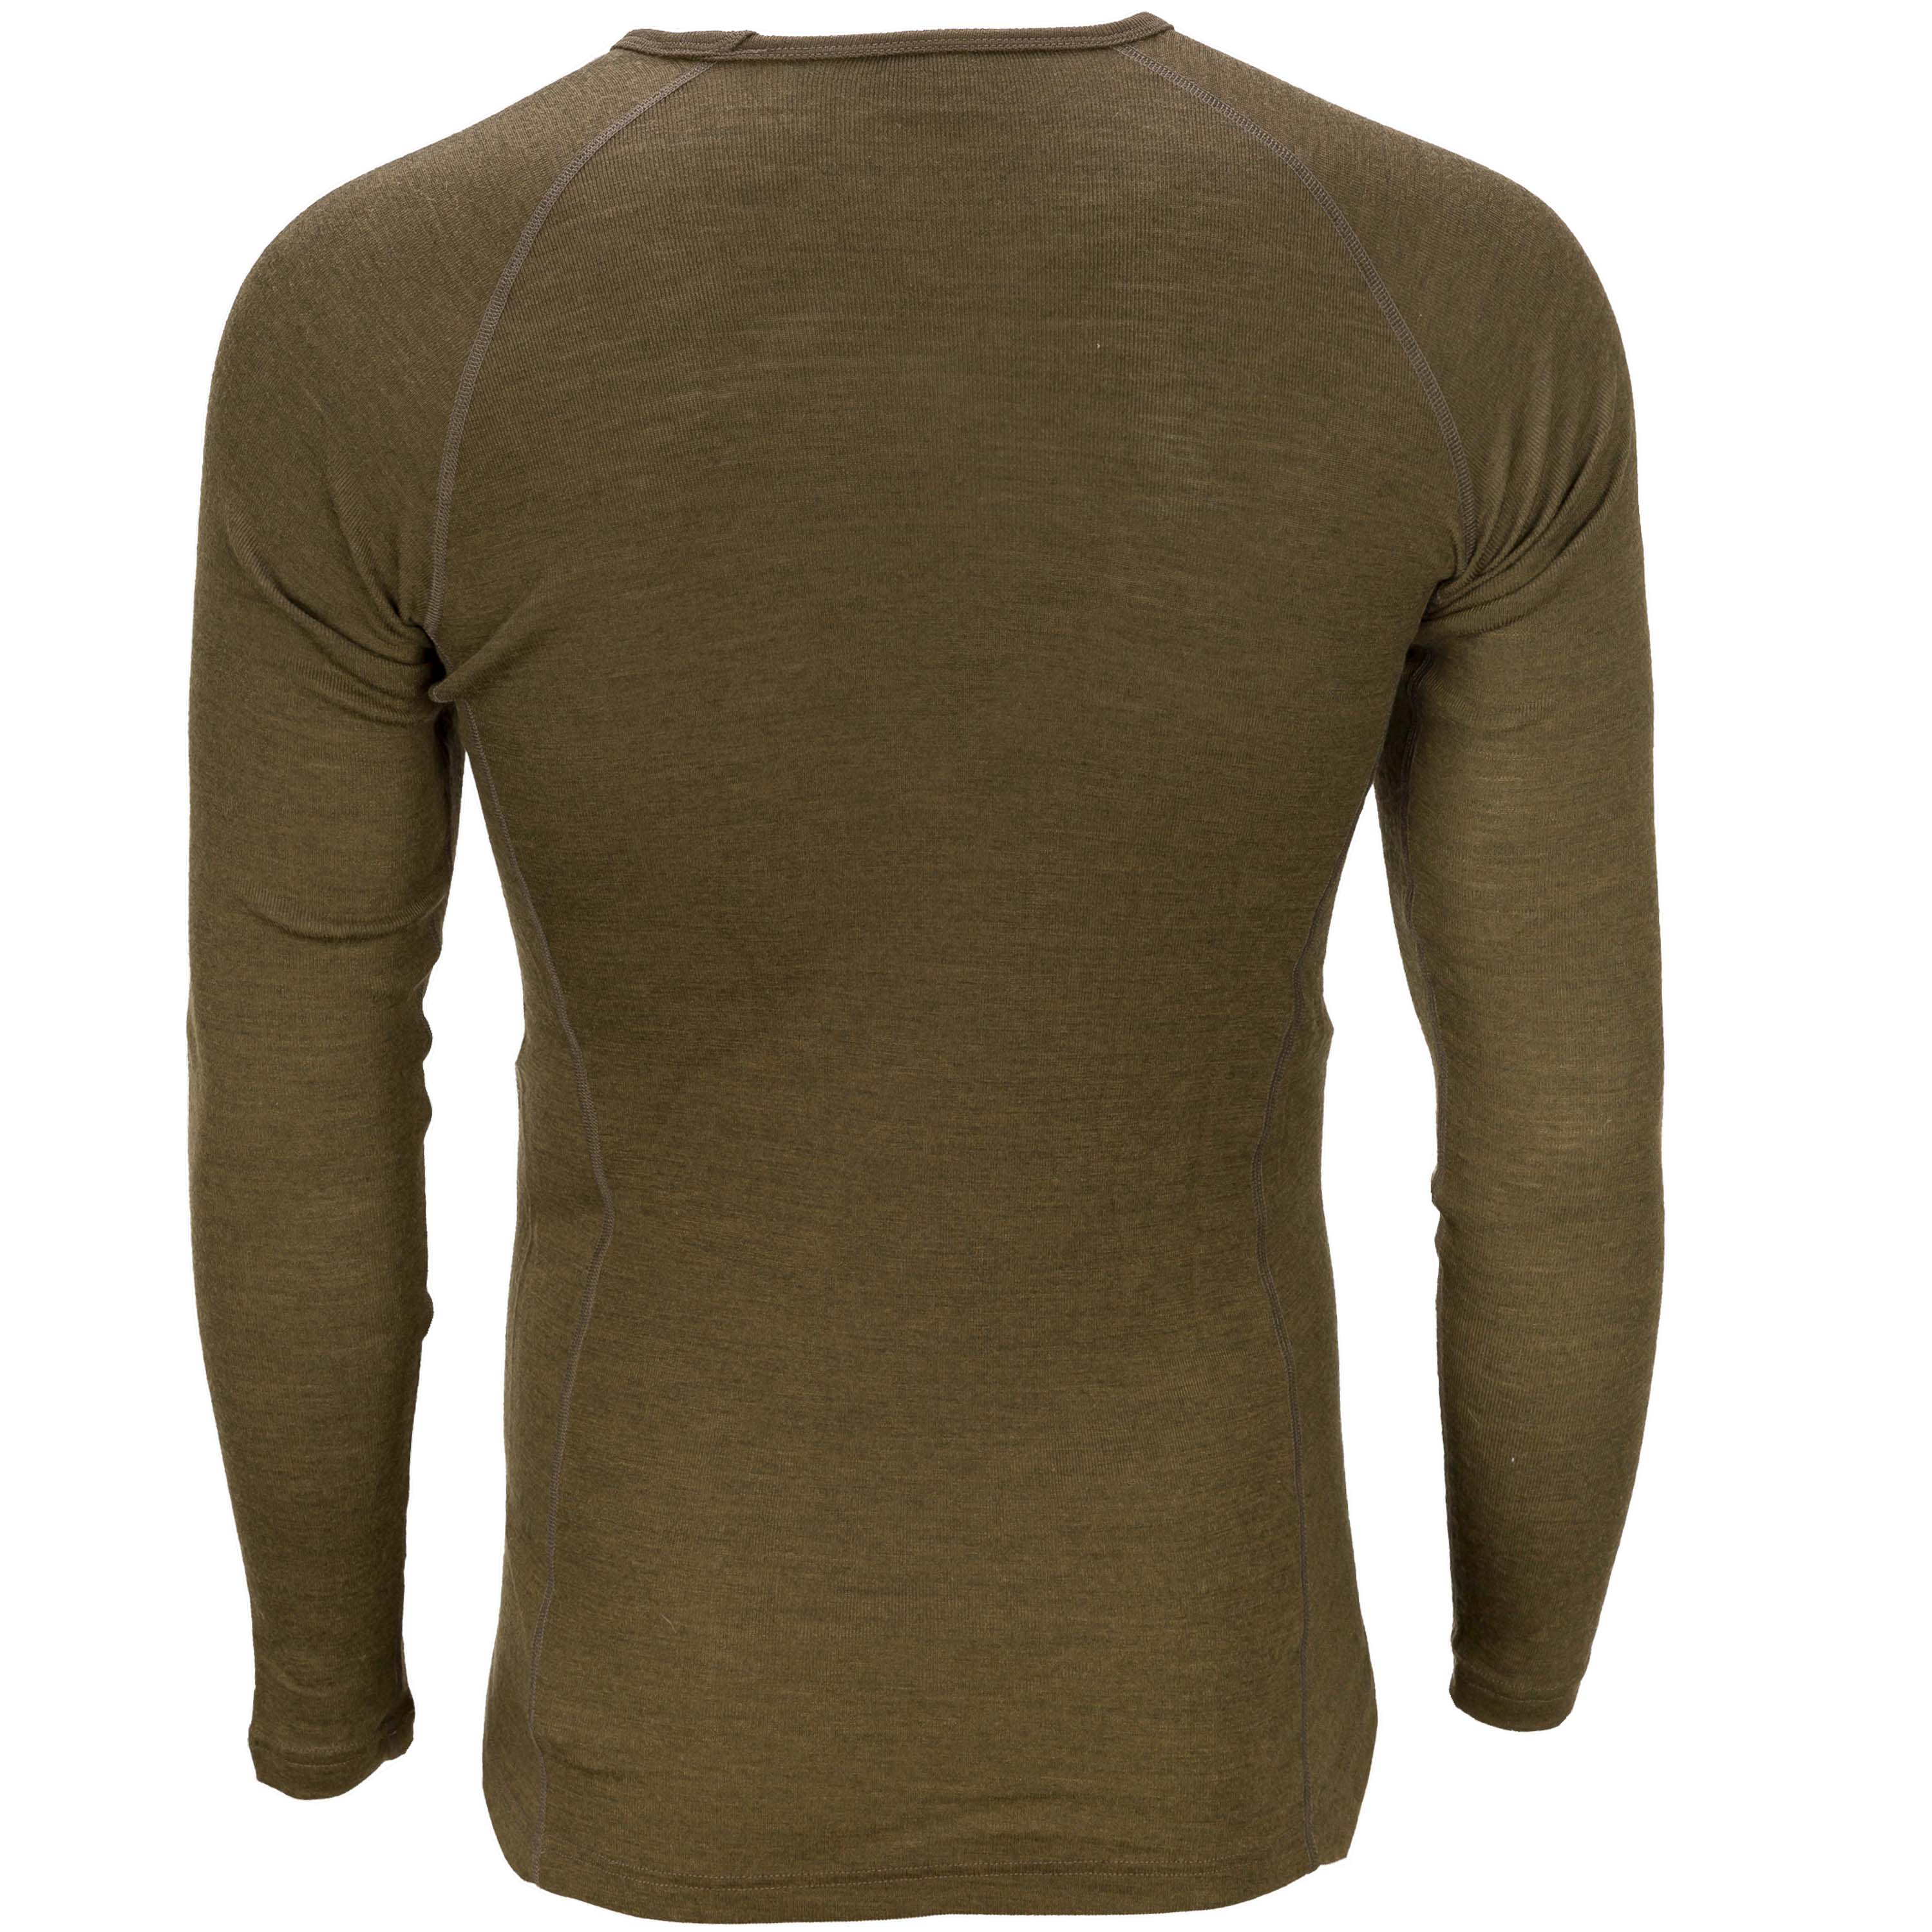 Purchase the Woolpower Lite Crew Neck Undershirt pine green by A